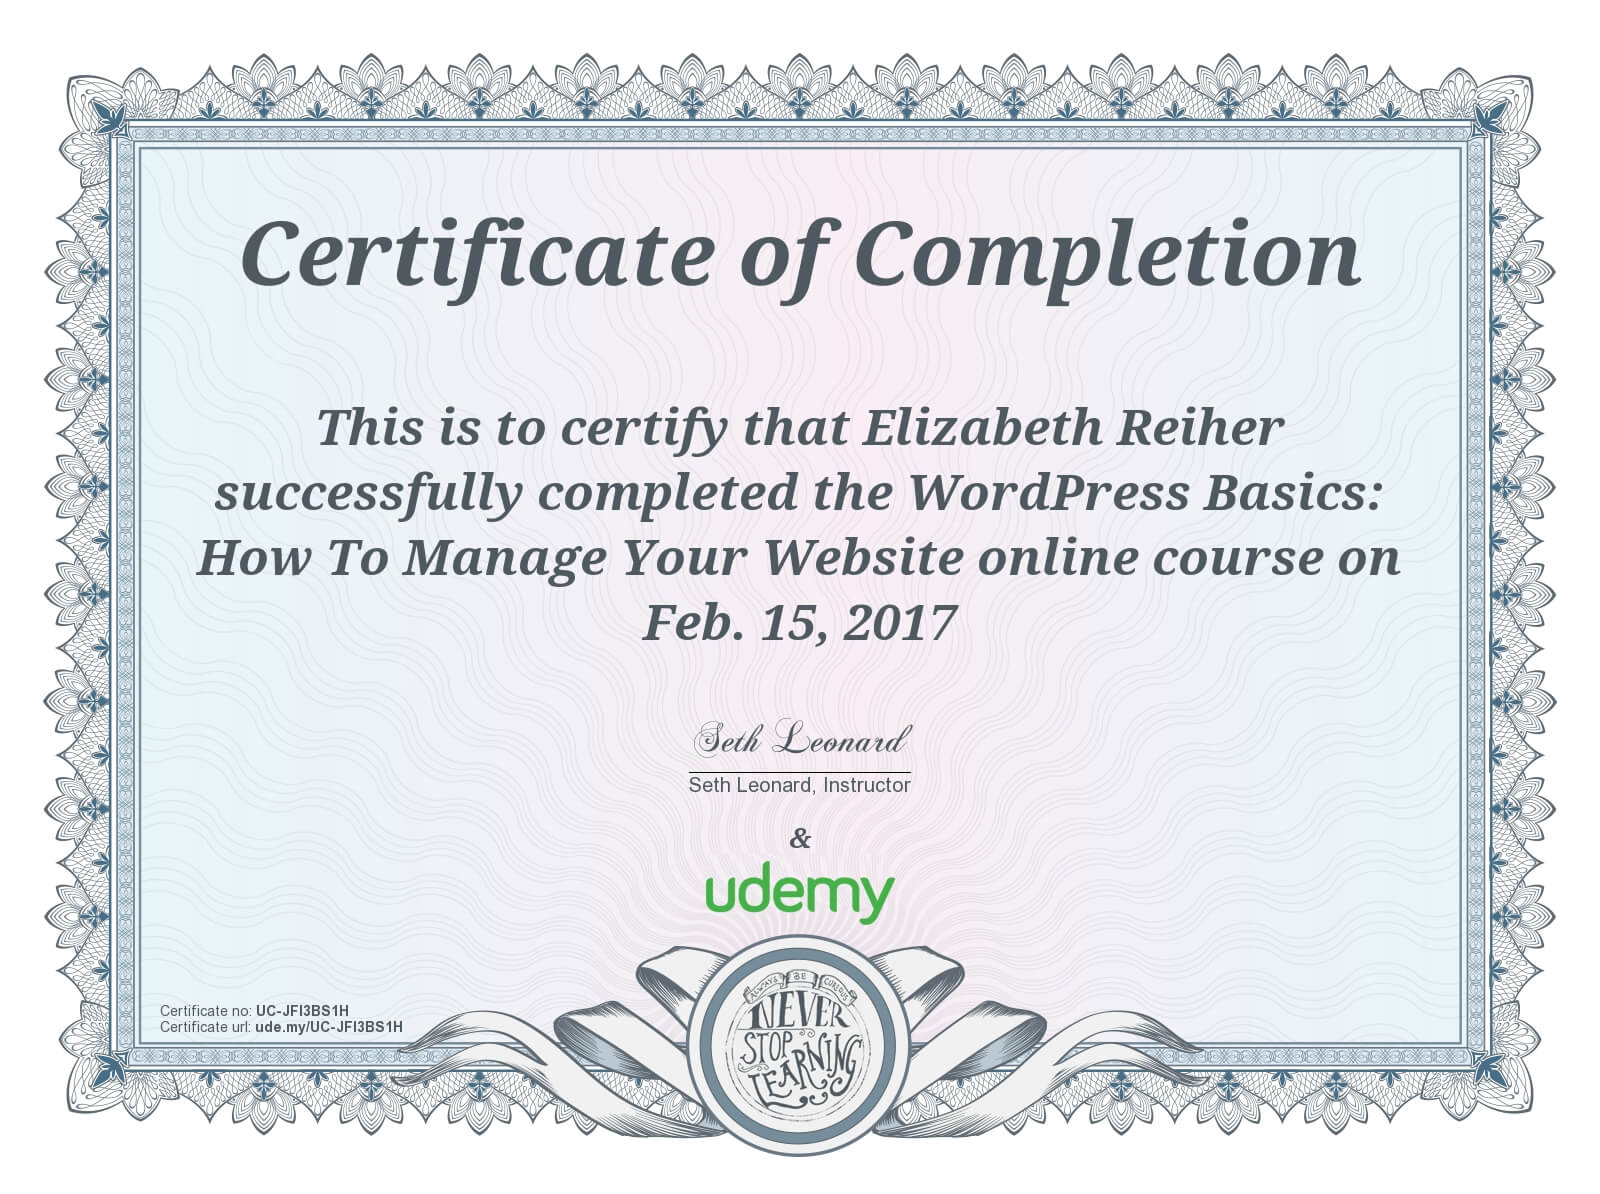 WordPress Basics Udemy Course Completion Certificate